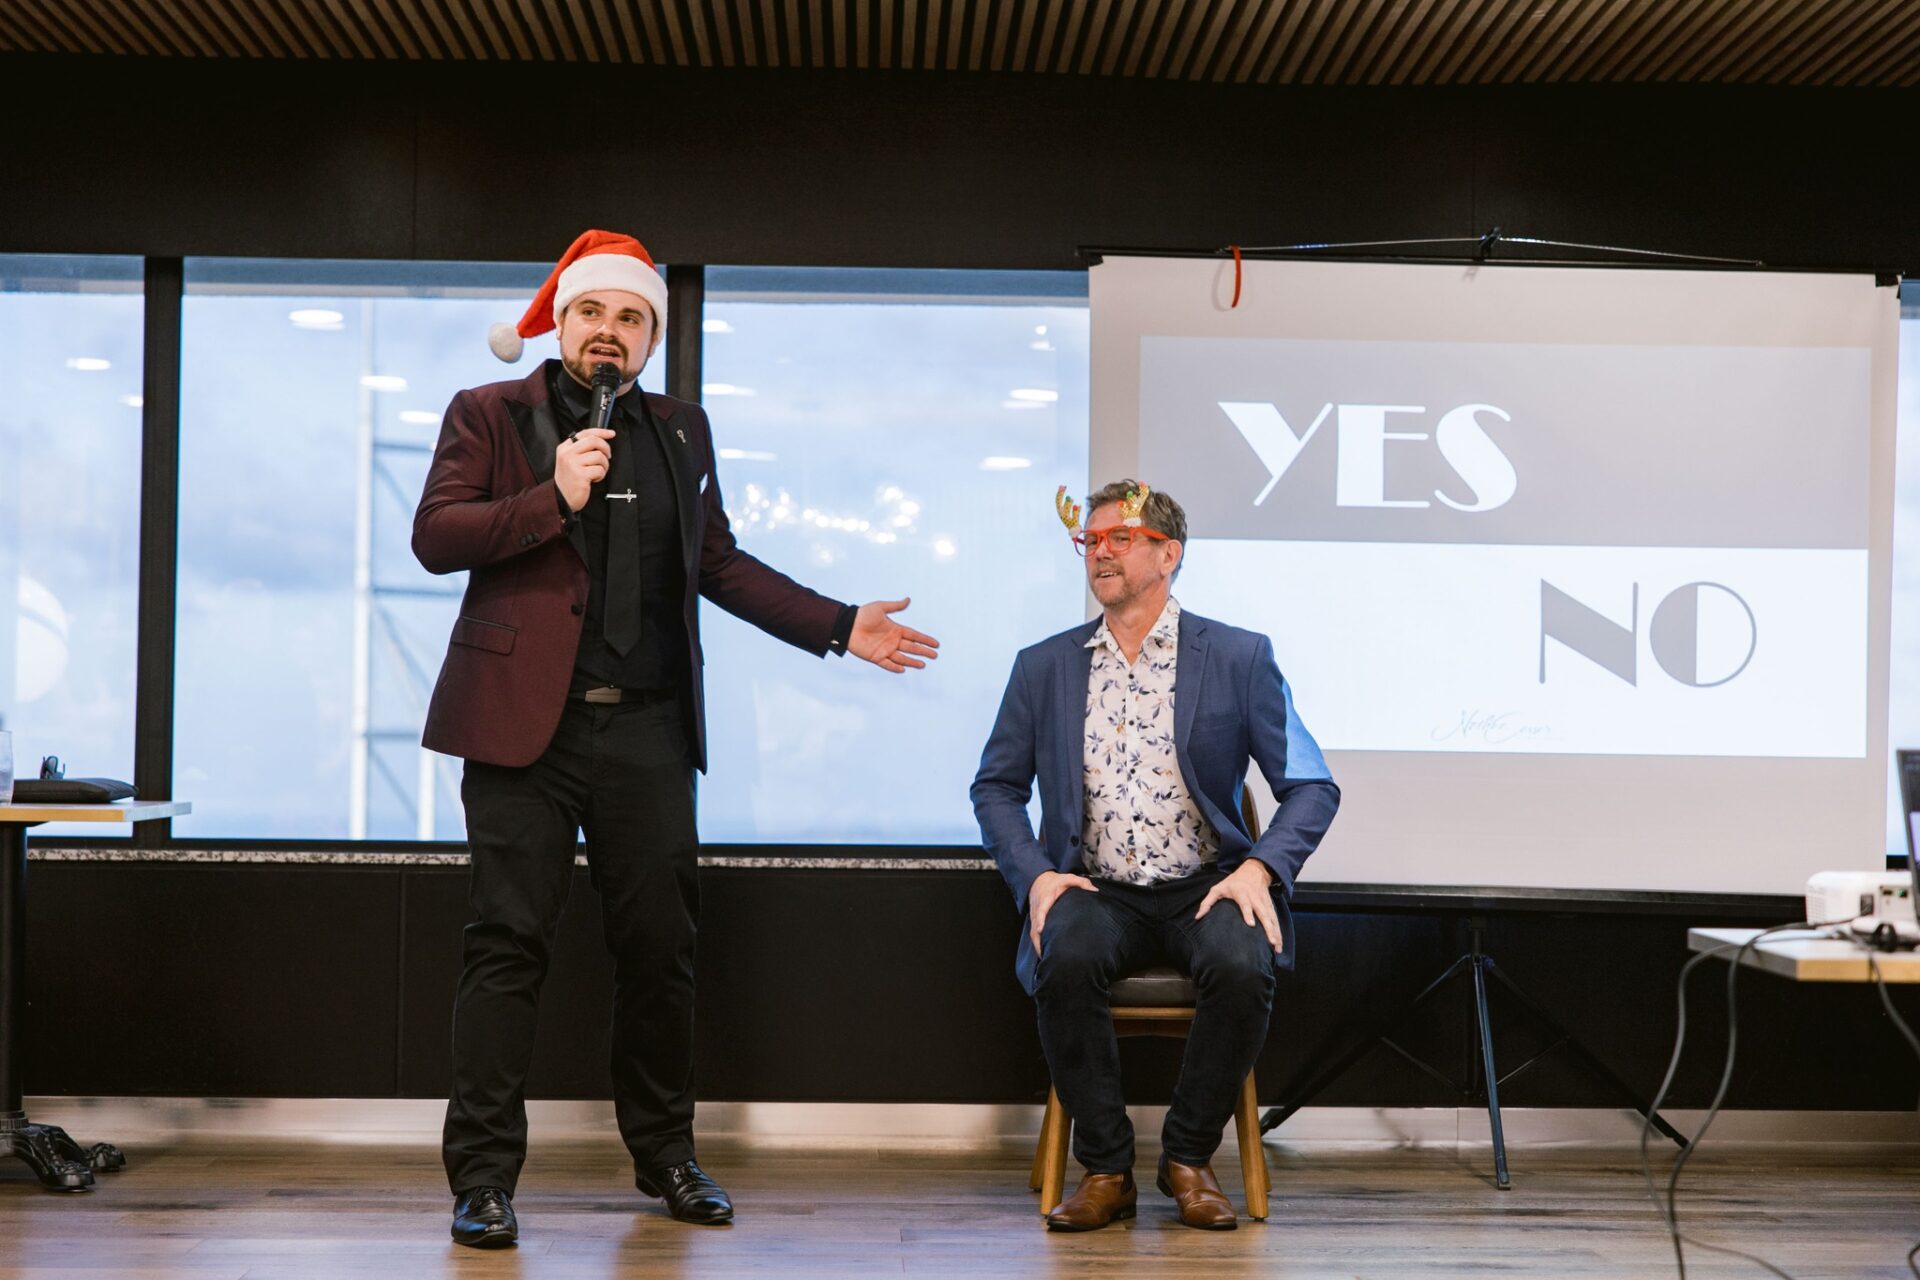 Nathan Cassar, corporate MC standing on stage in a red tuxeo jacket and wearing a santa hat with a guest sitting down on a chari to his right with a screen in the background that reads "YES NO"